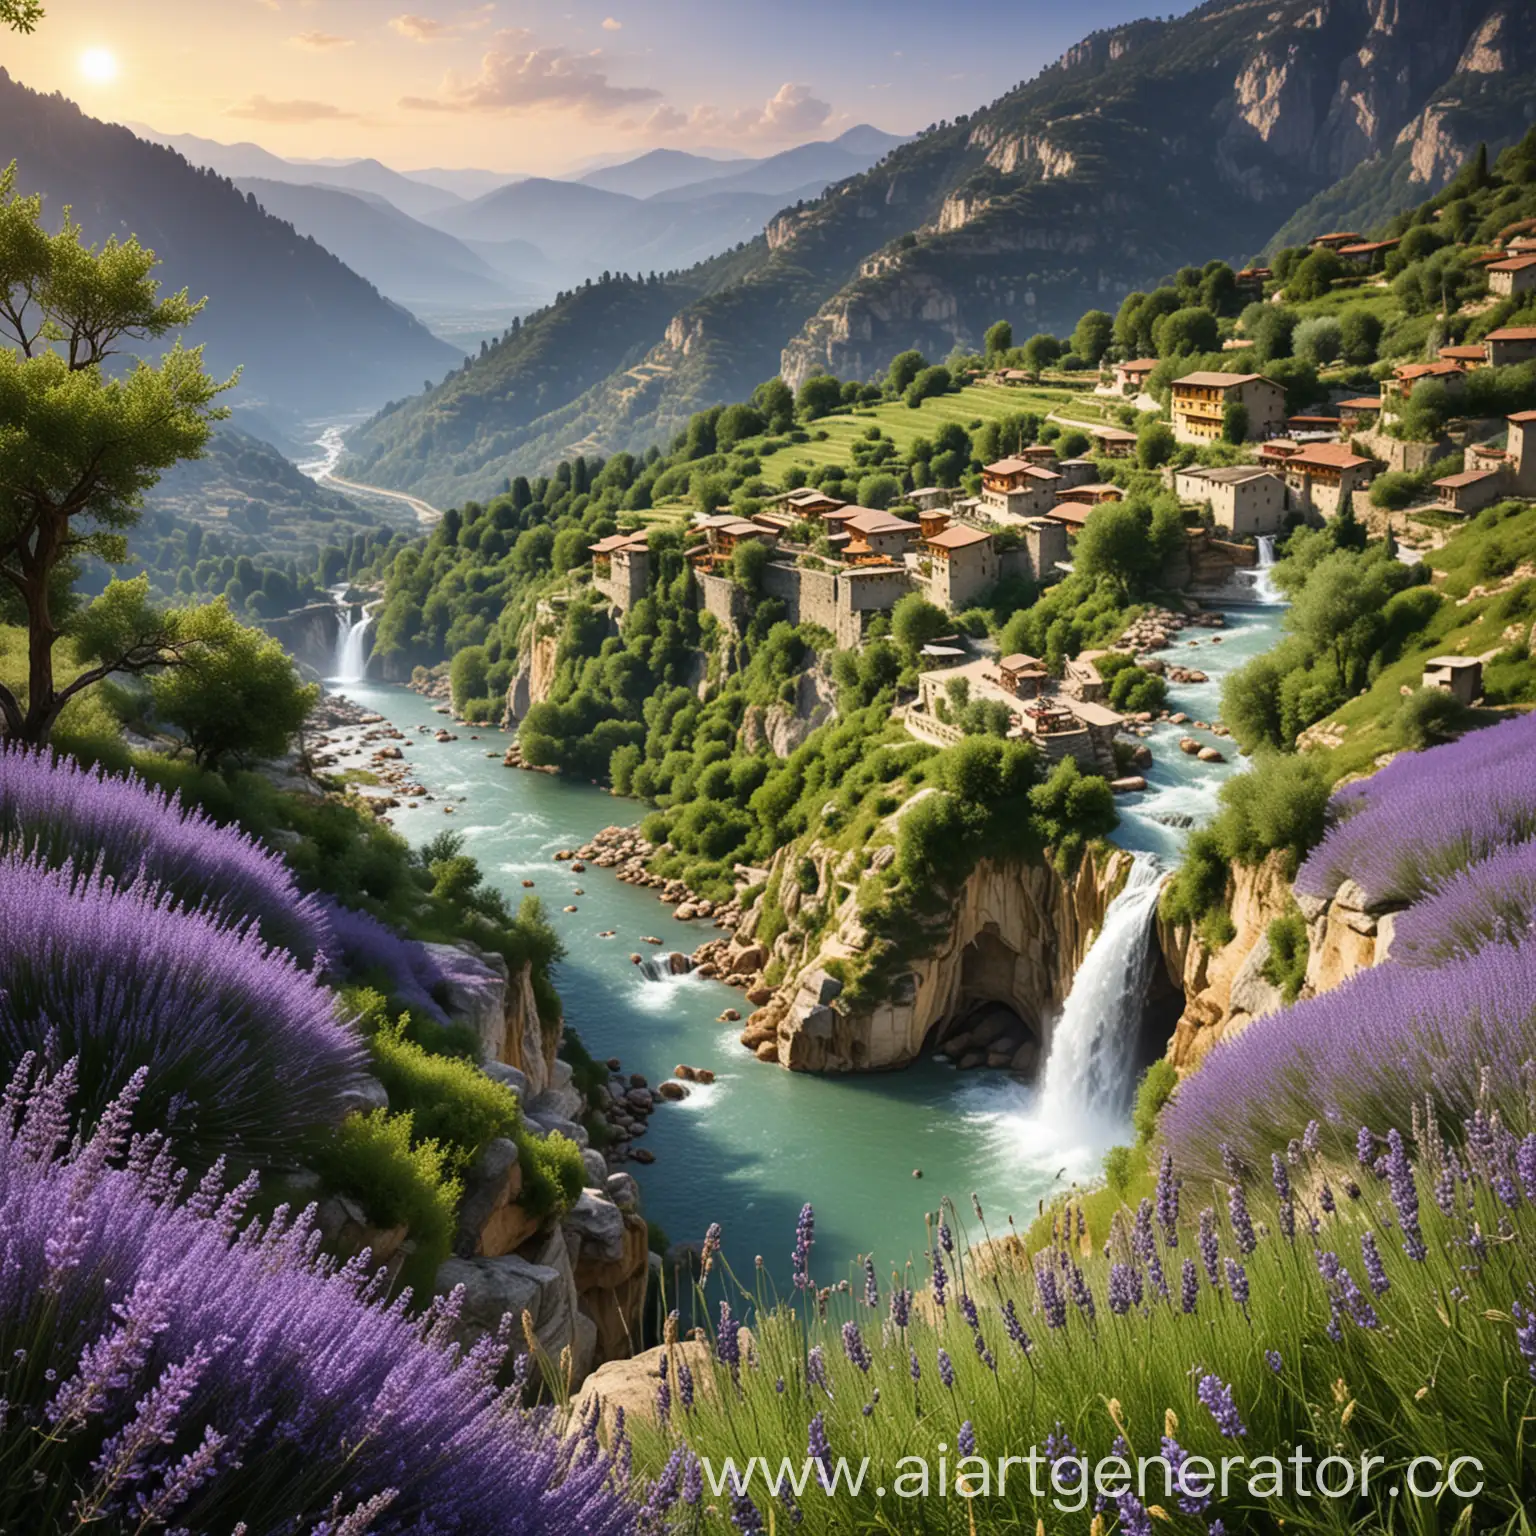 Tourists-Enjoying-Tranquil-Mountain-Scenery-and-Aromatic-Lavender-Fields